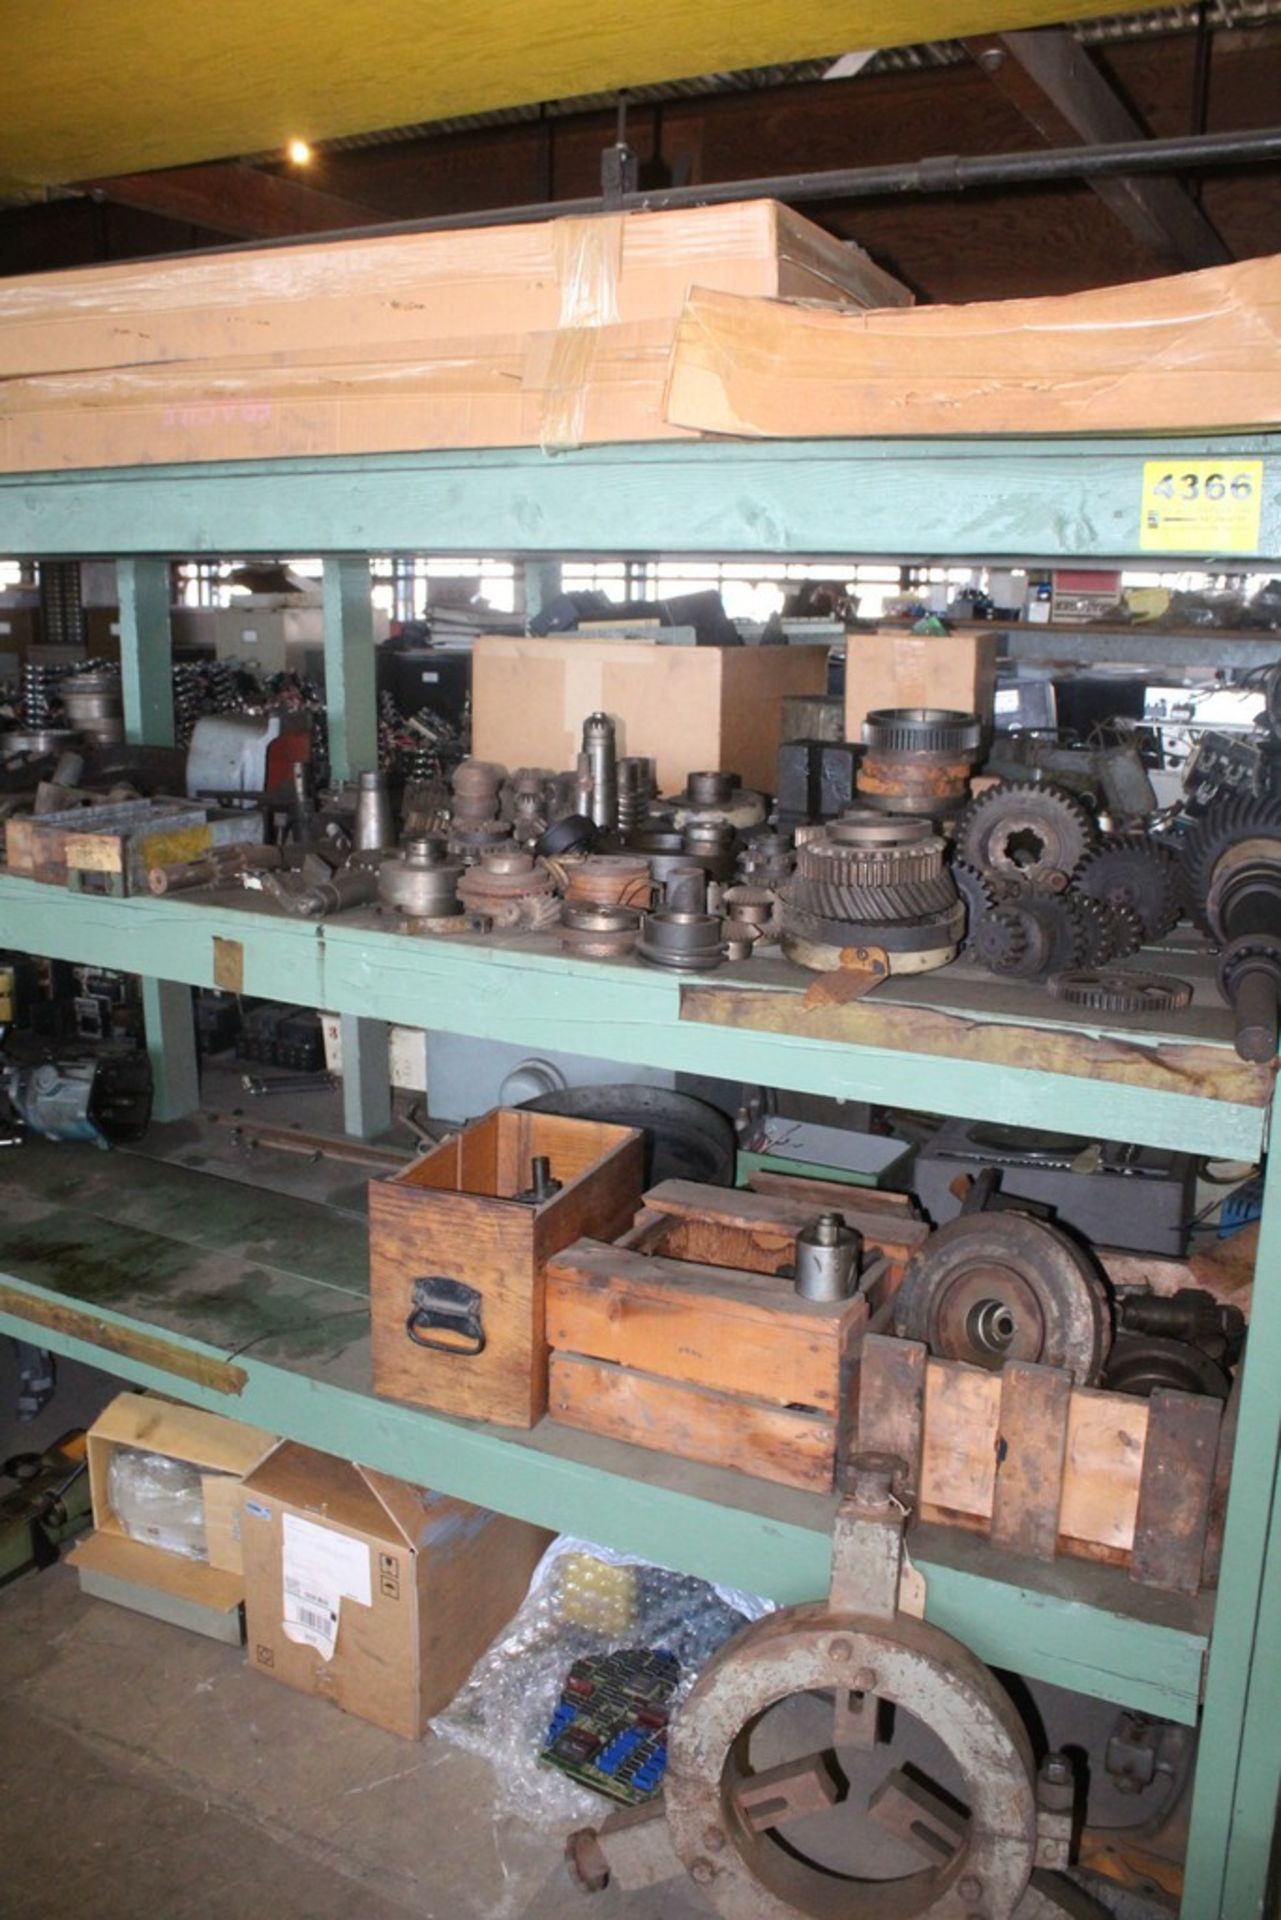 LARGE QTY OF ELECTRICAL PARTS ON 2 SECTION OF SHELF